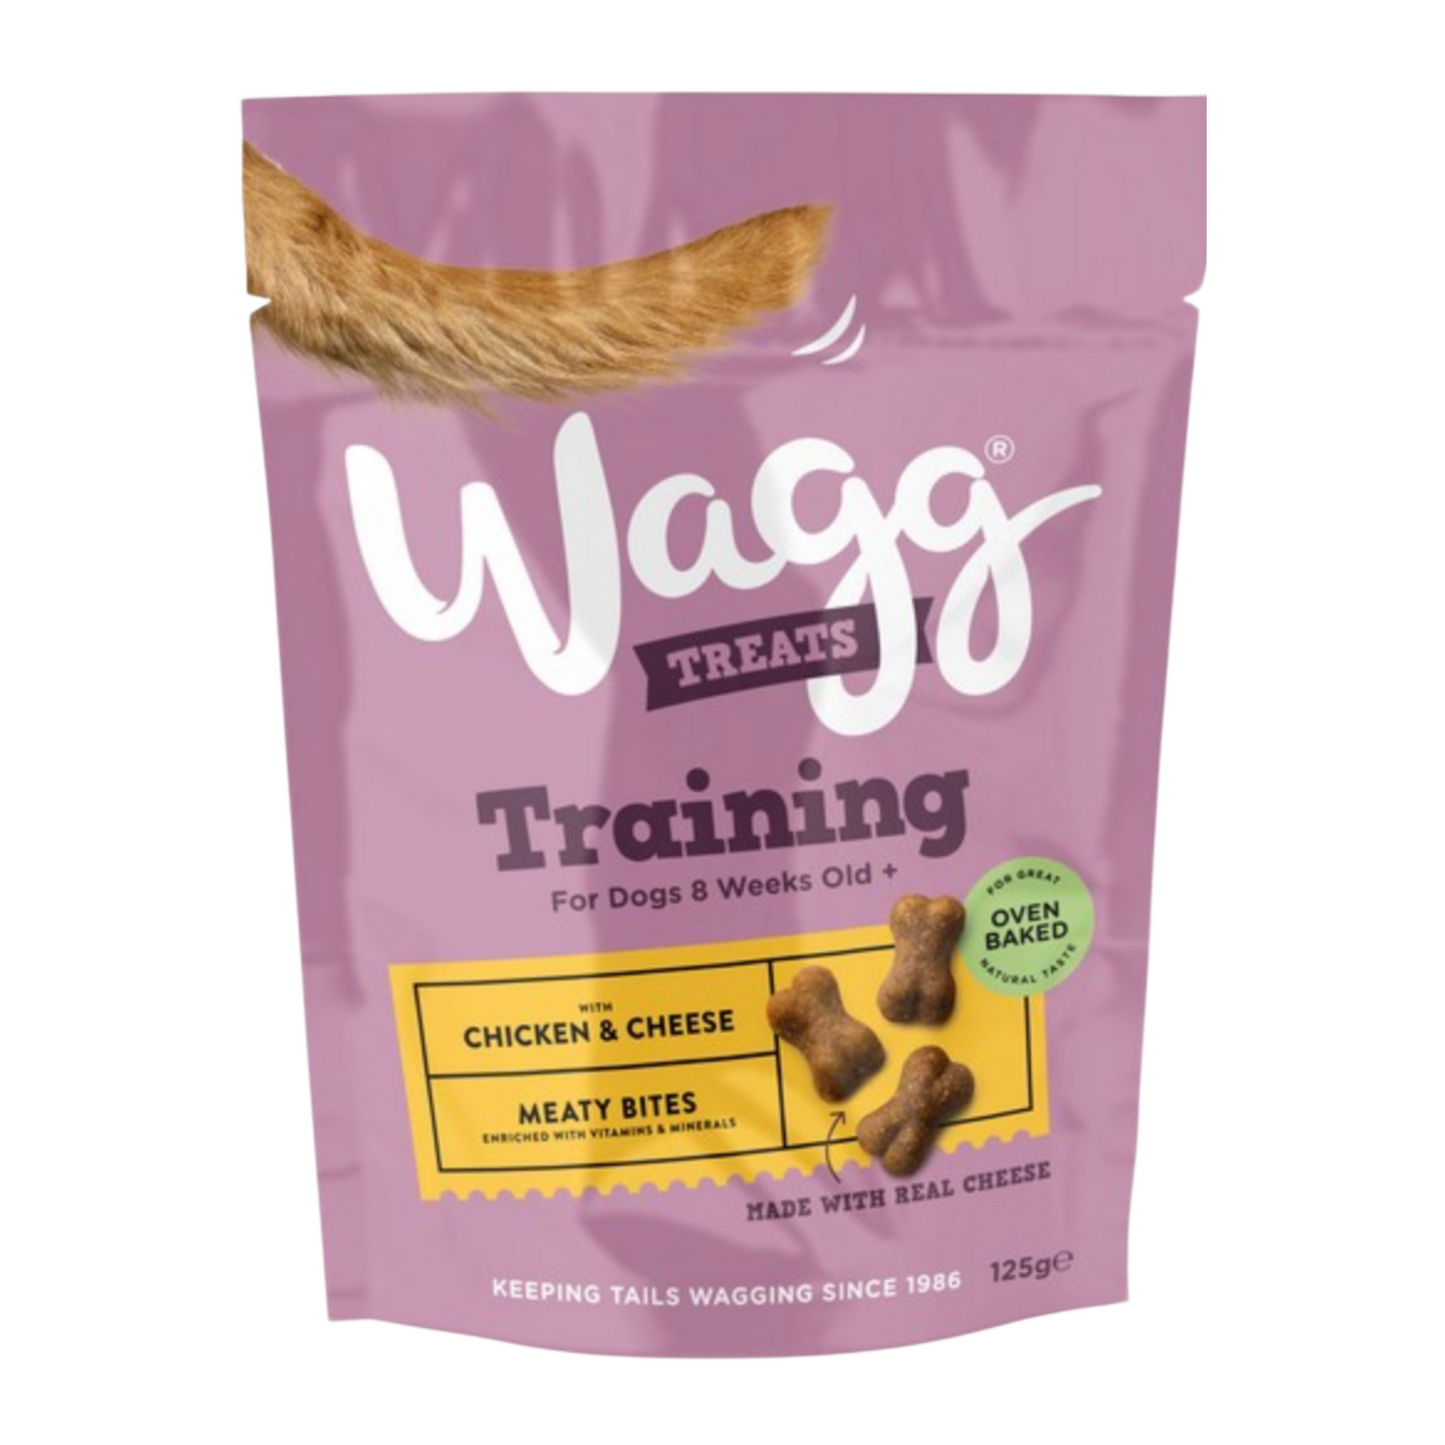 Wagg Training Dog Treats With Chicken & Cheese Meaty Bites 125g